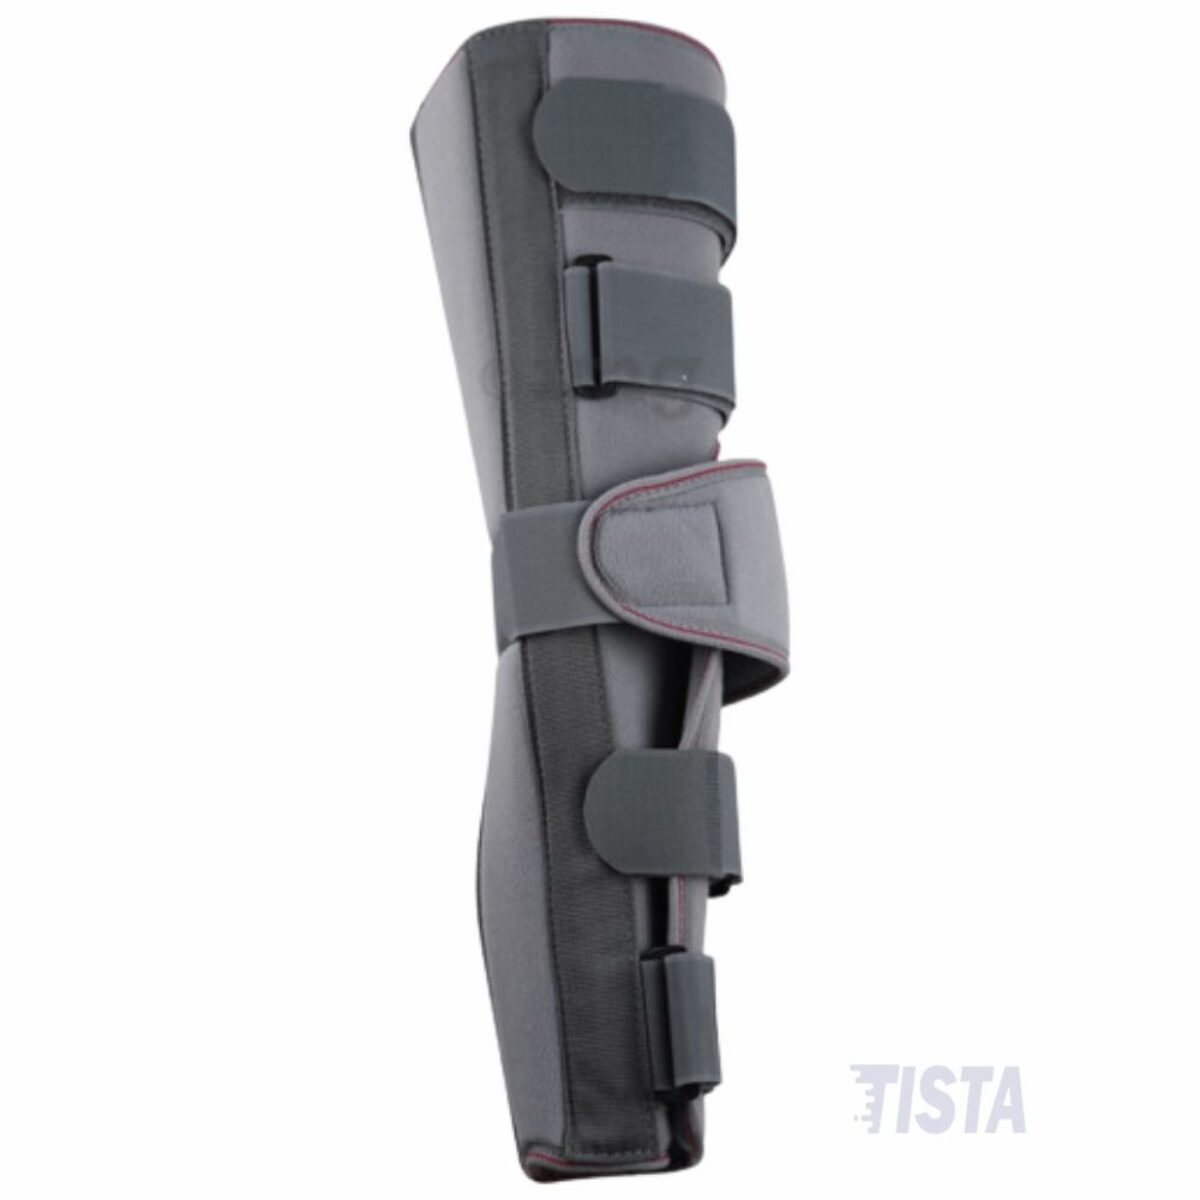 Tynor D-09 Functional Knee Support Price in Bangladesh - ShopZ BD